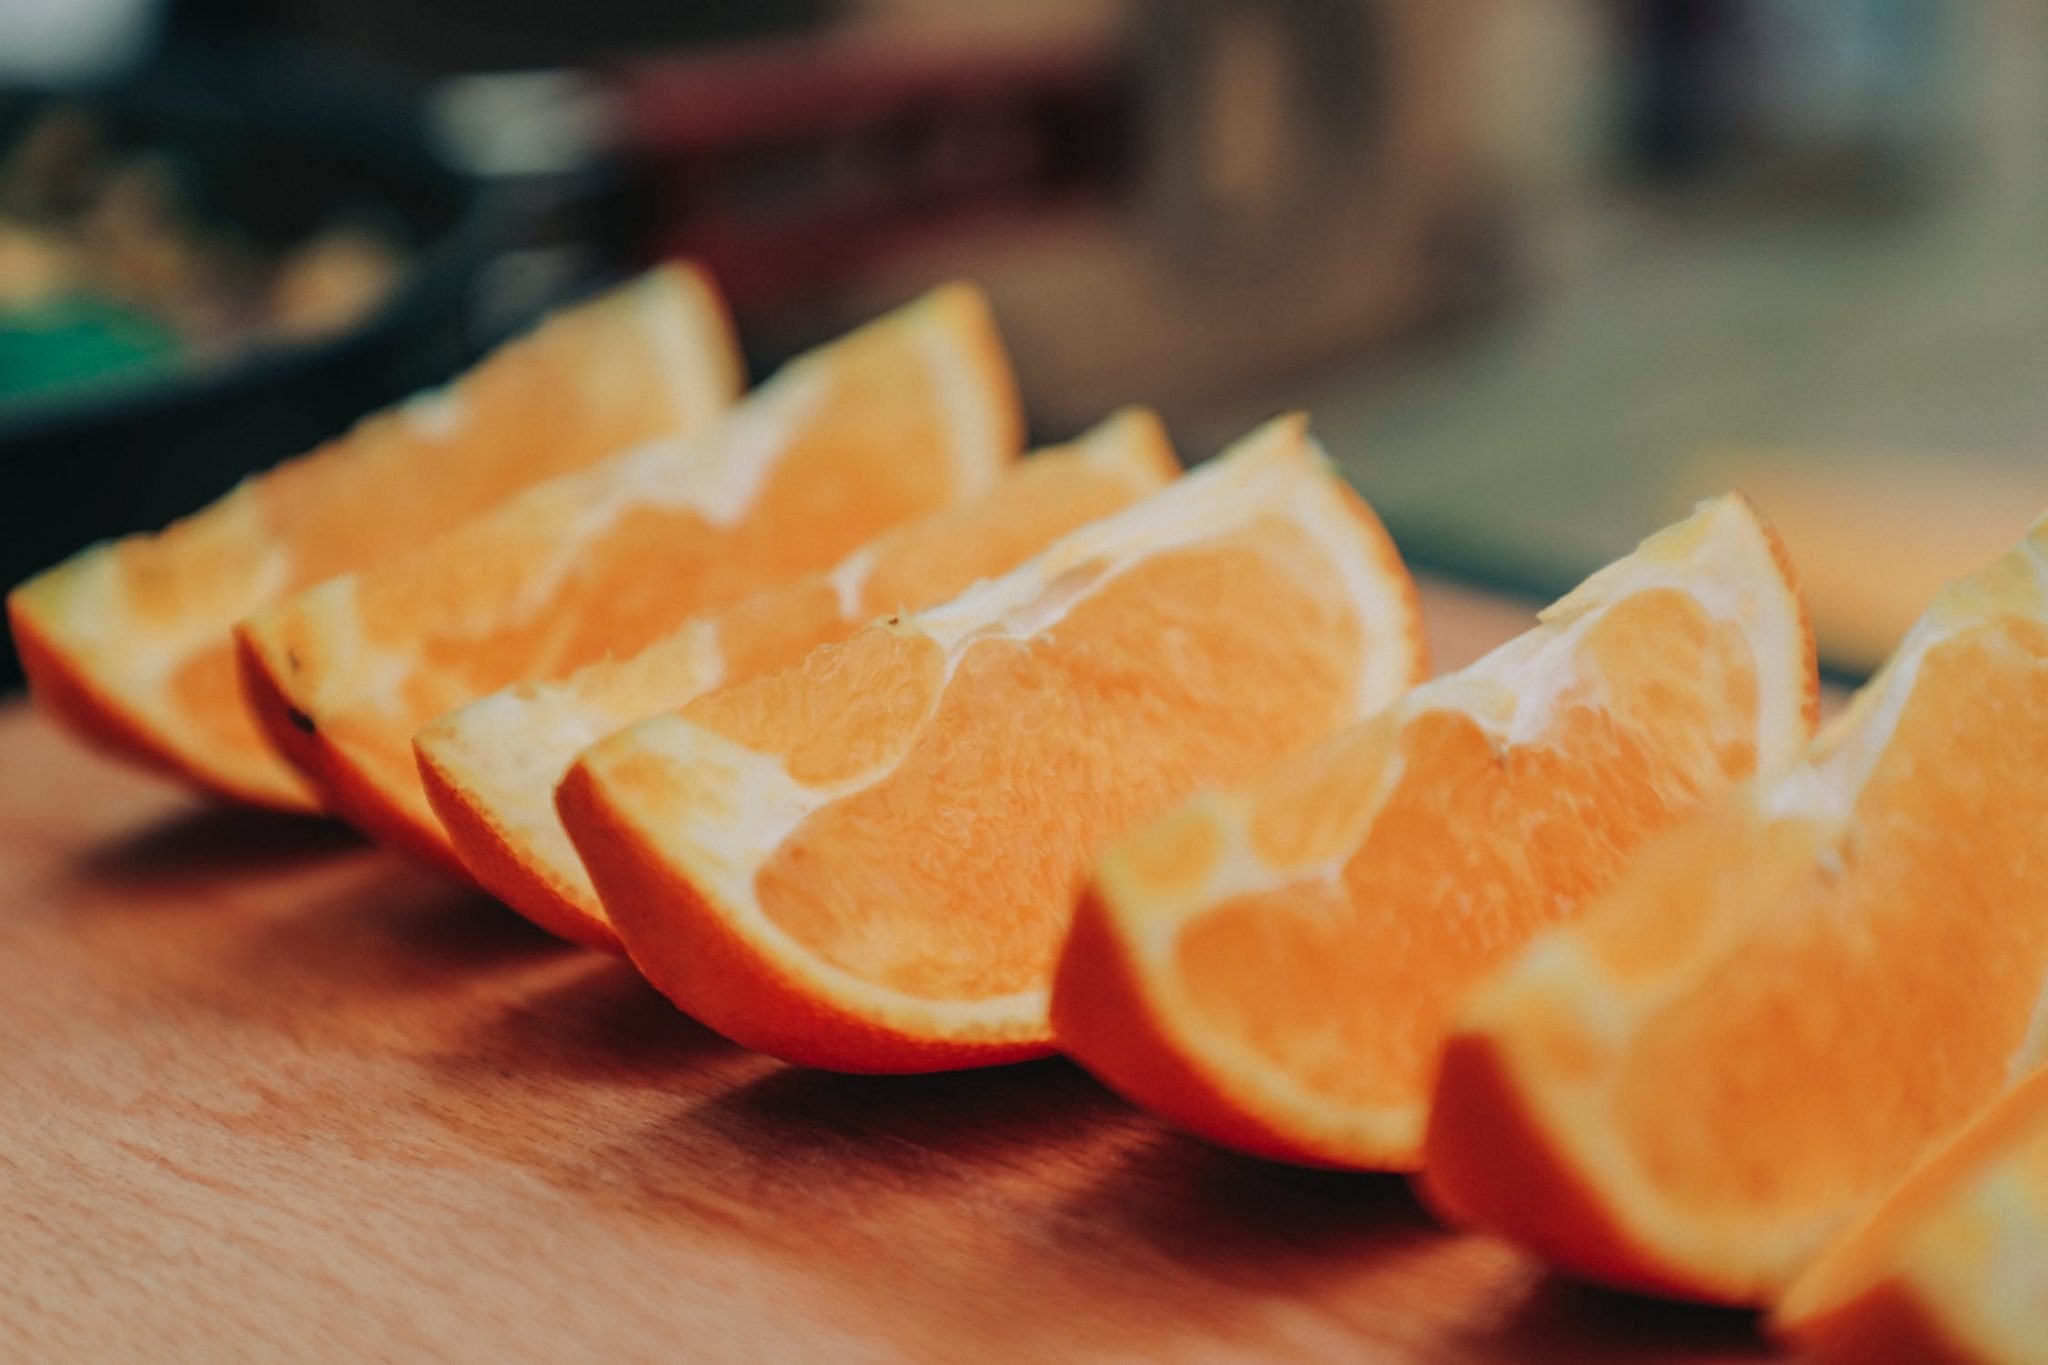 Are Oranges Bad For Arthritis? No, They are Actually Very Beneficial